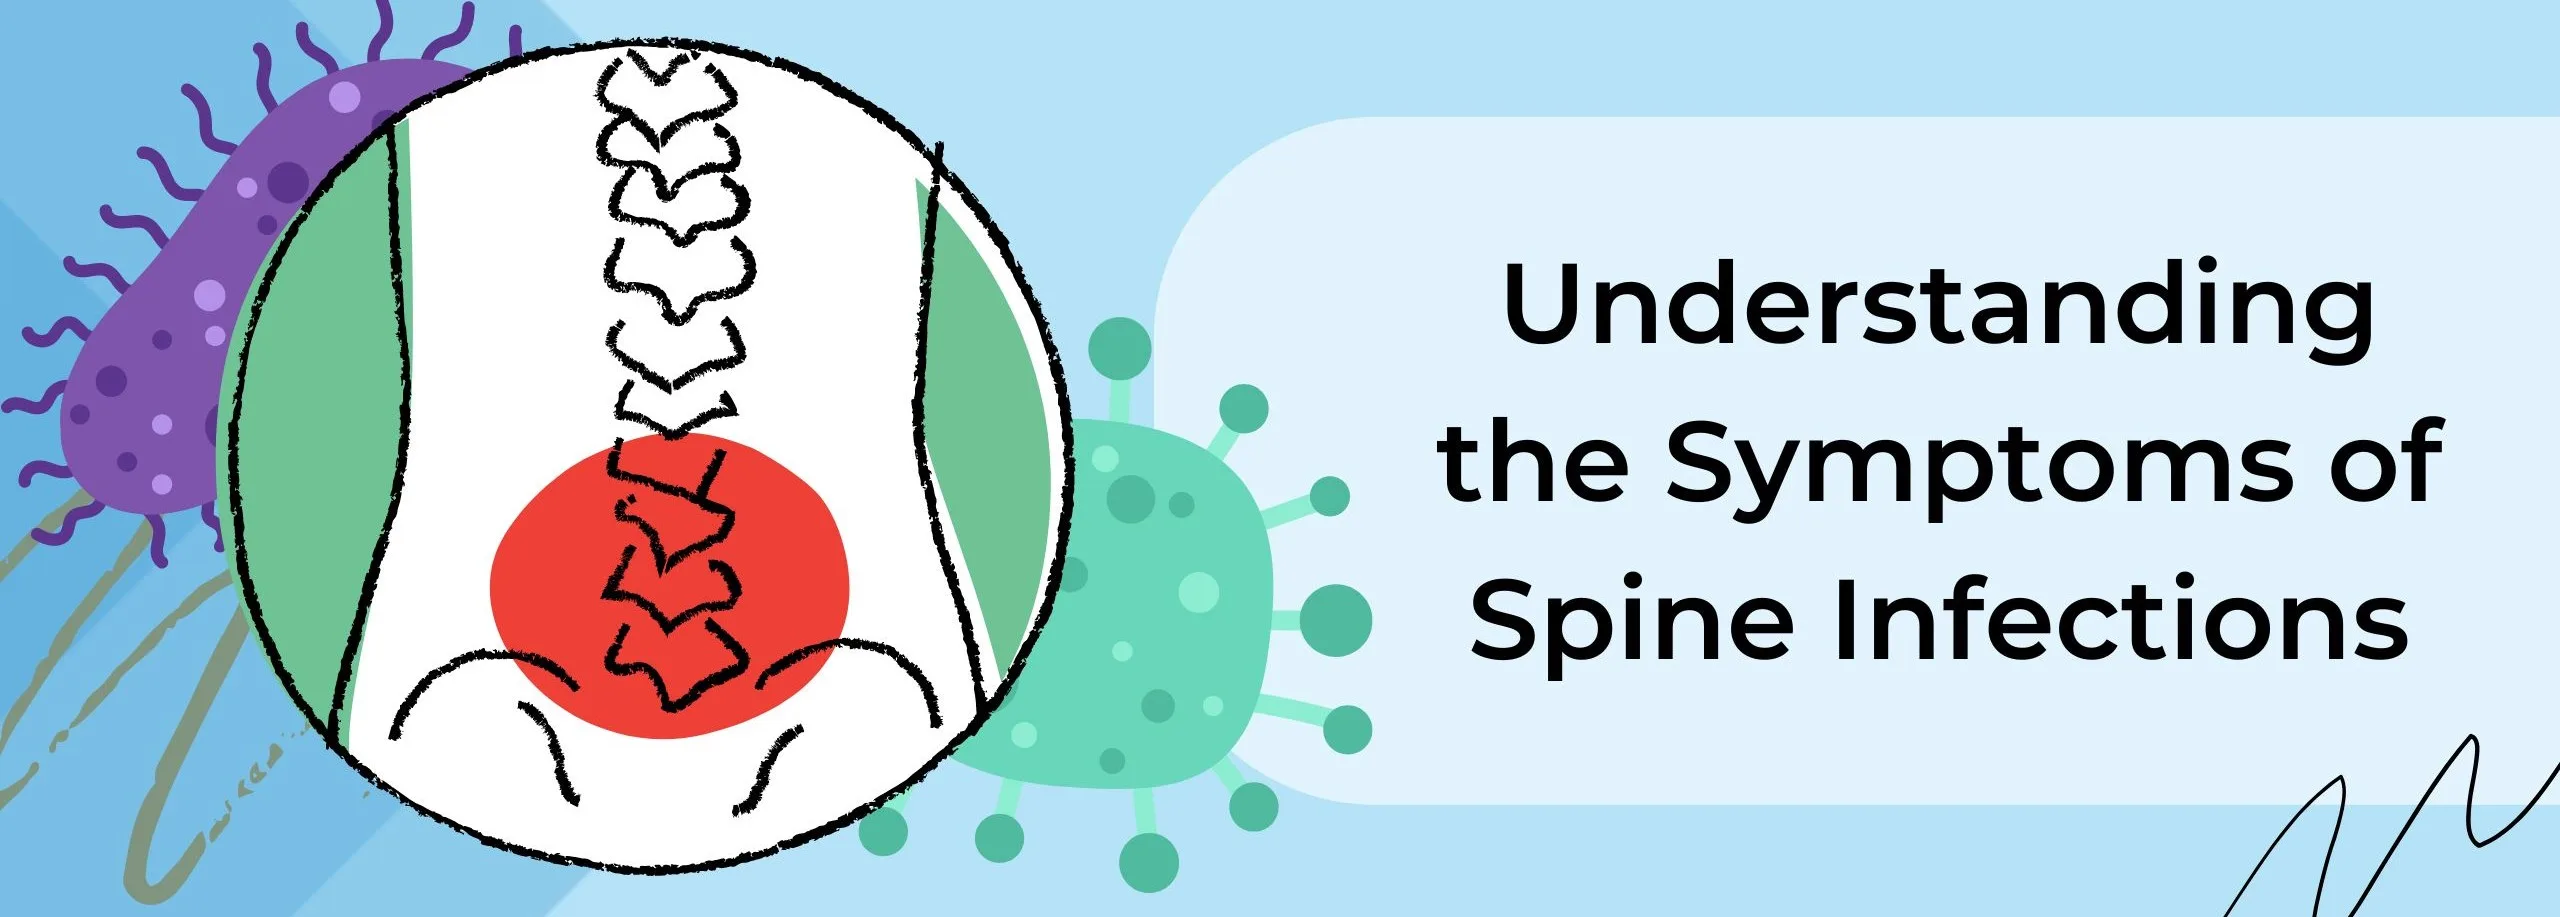 spine infection symptoms